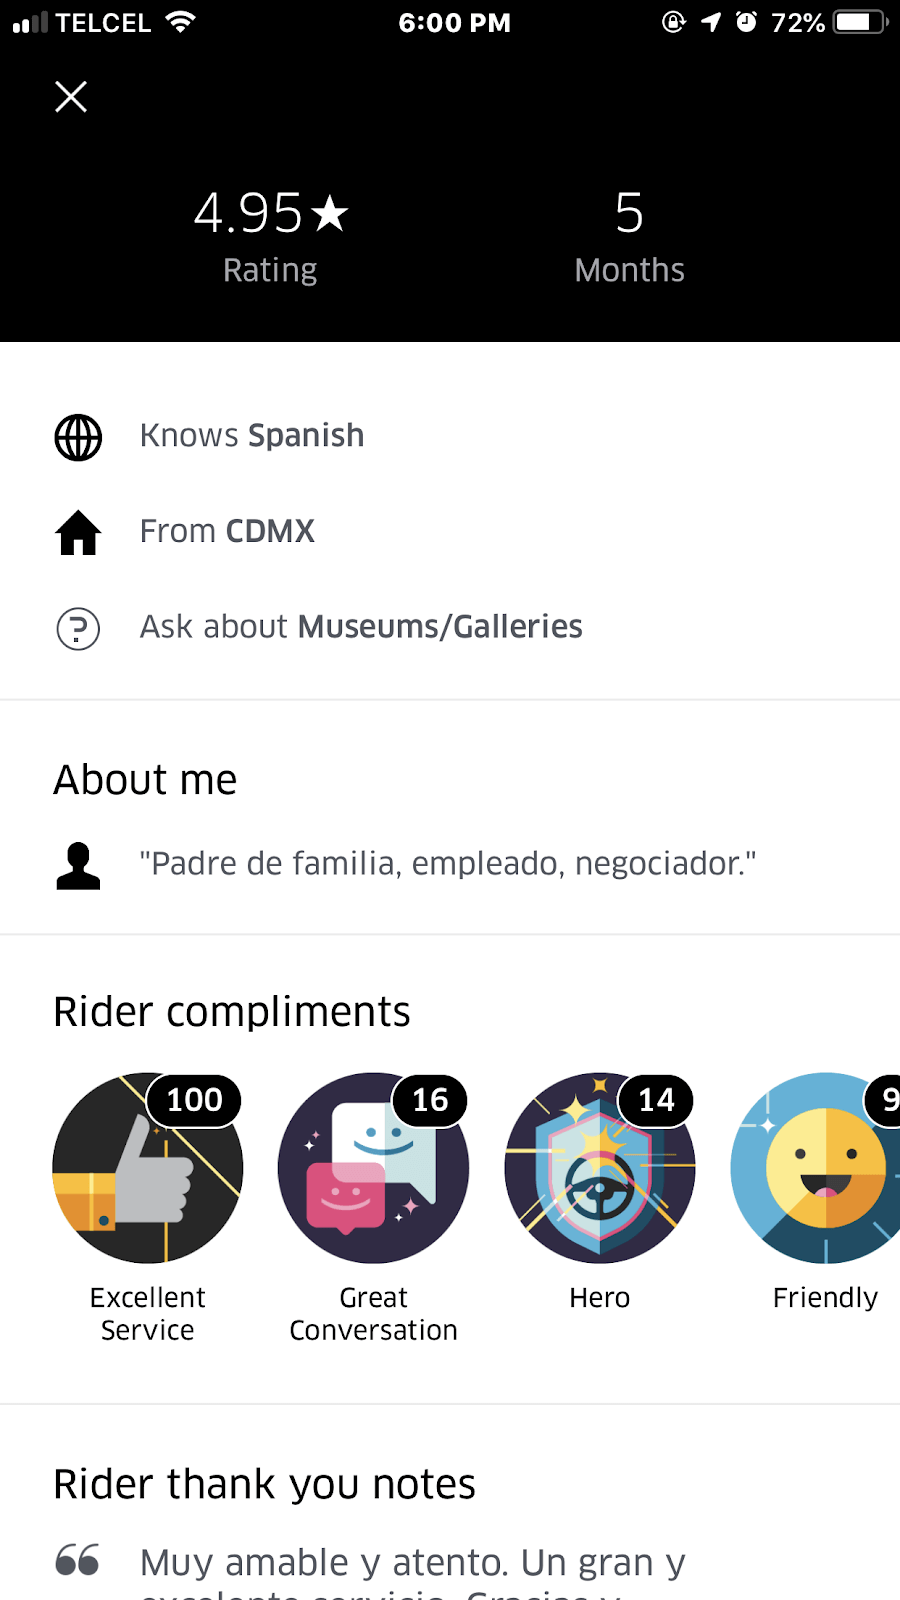 Uber.com example of customer experience with their rating system of their drivers